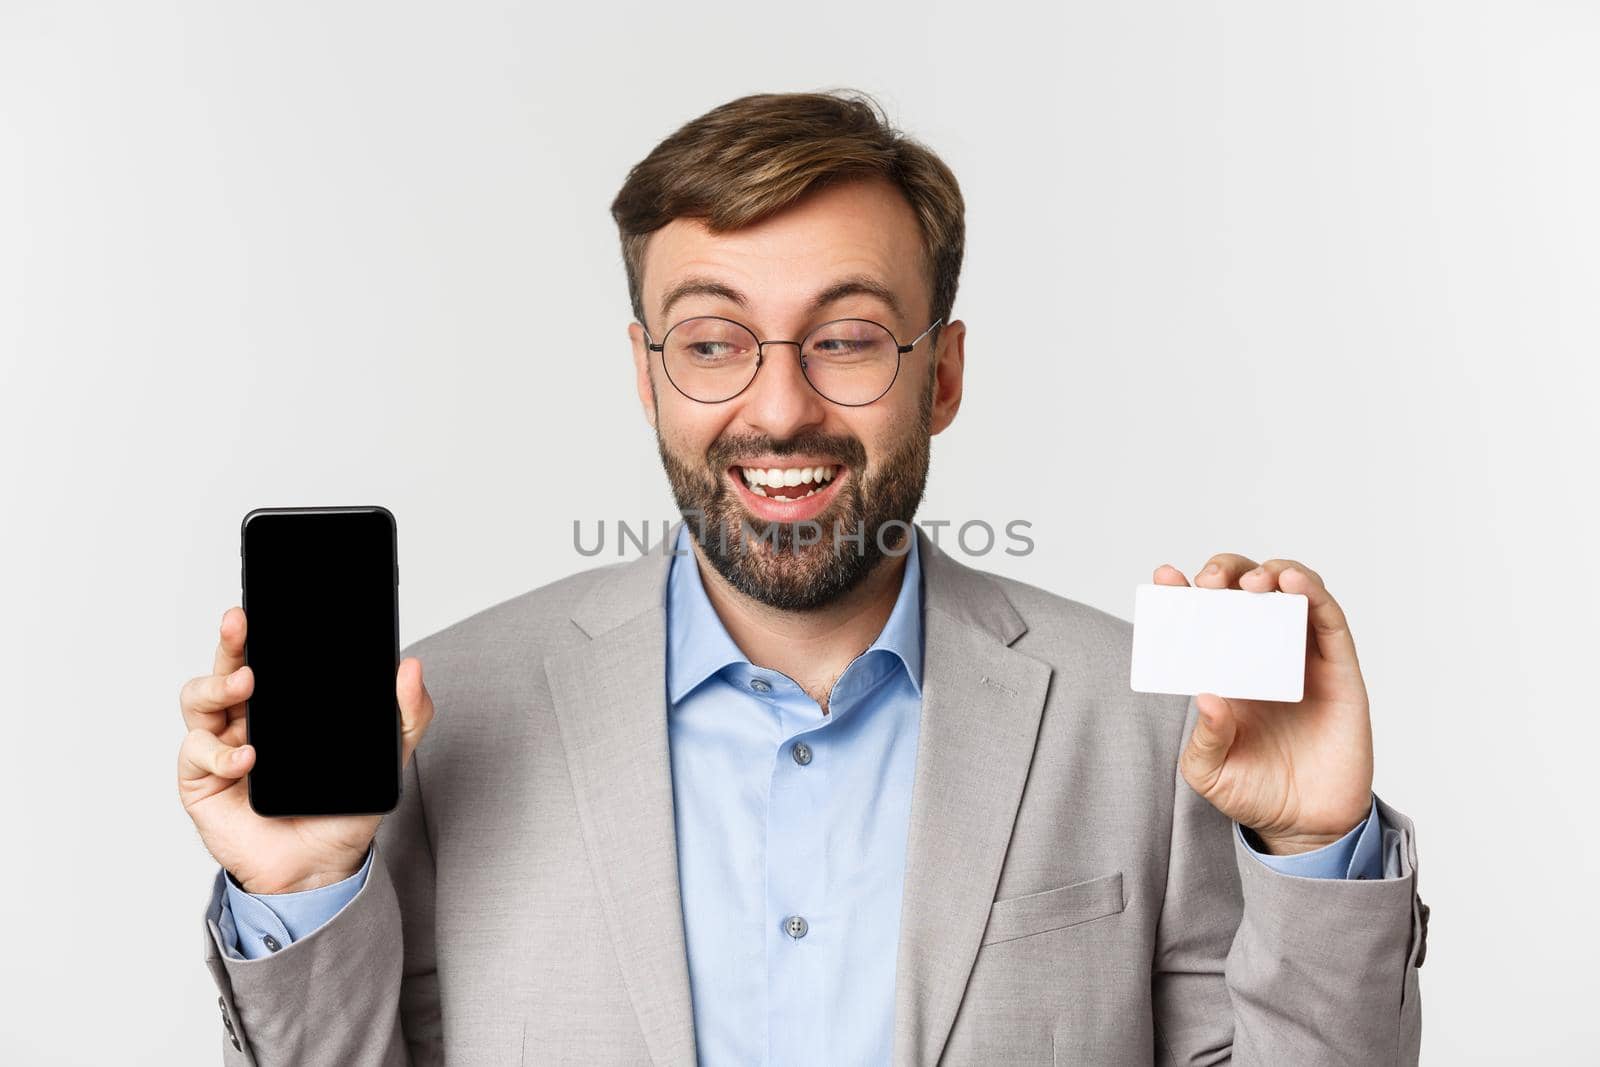 Close-up of handsome smiling male entrepreneur, wearing glasses and gray suit, showing credit card and looking excited at smartphone screen, standing over white background.